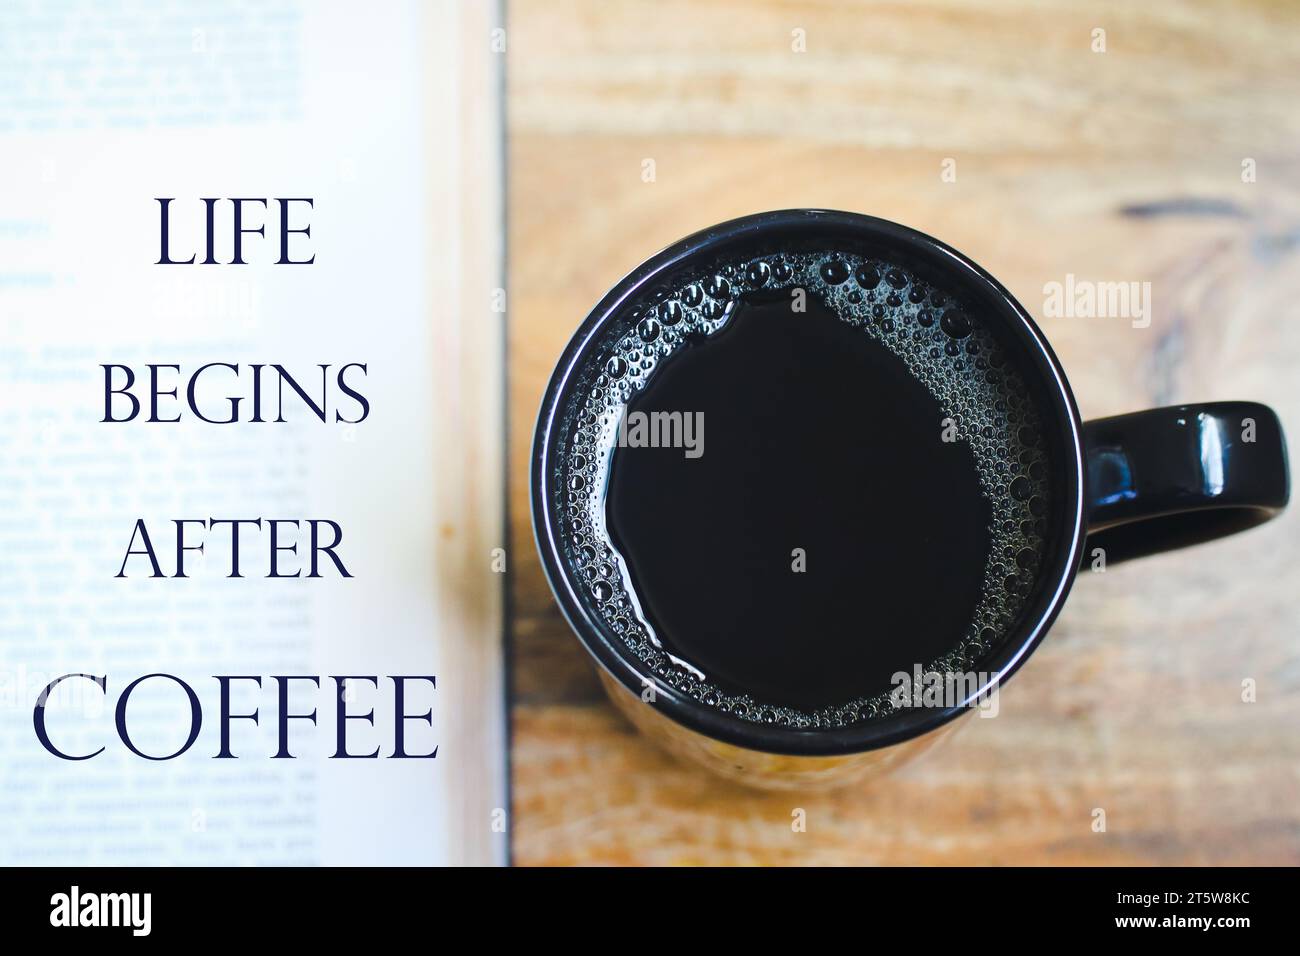 https://c8.alamy.com/comp/2T5W8KC/quote-saying-motivational-and-inspirational-quotes-life-begins-after-coffee-2T5W8KC.jpg